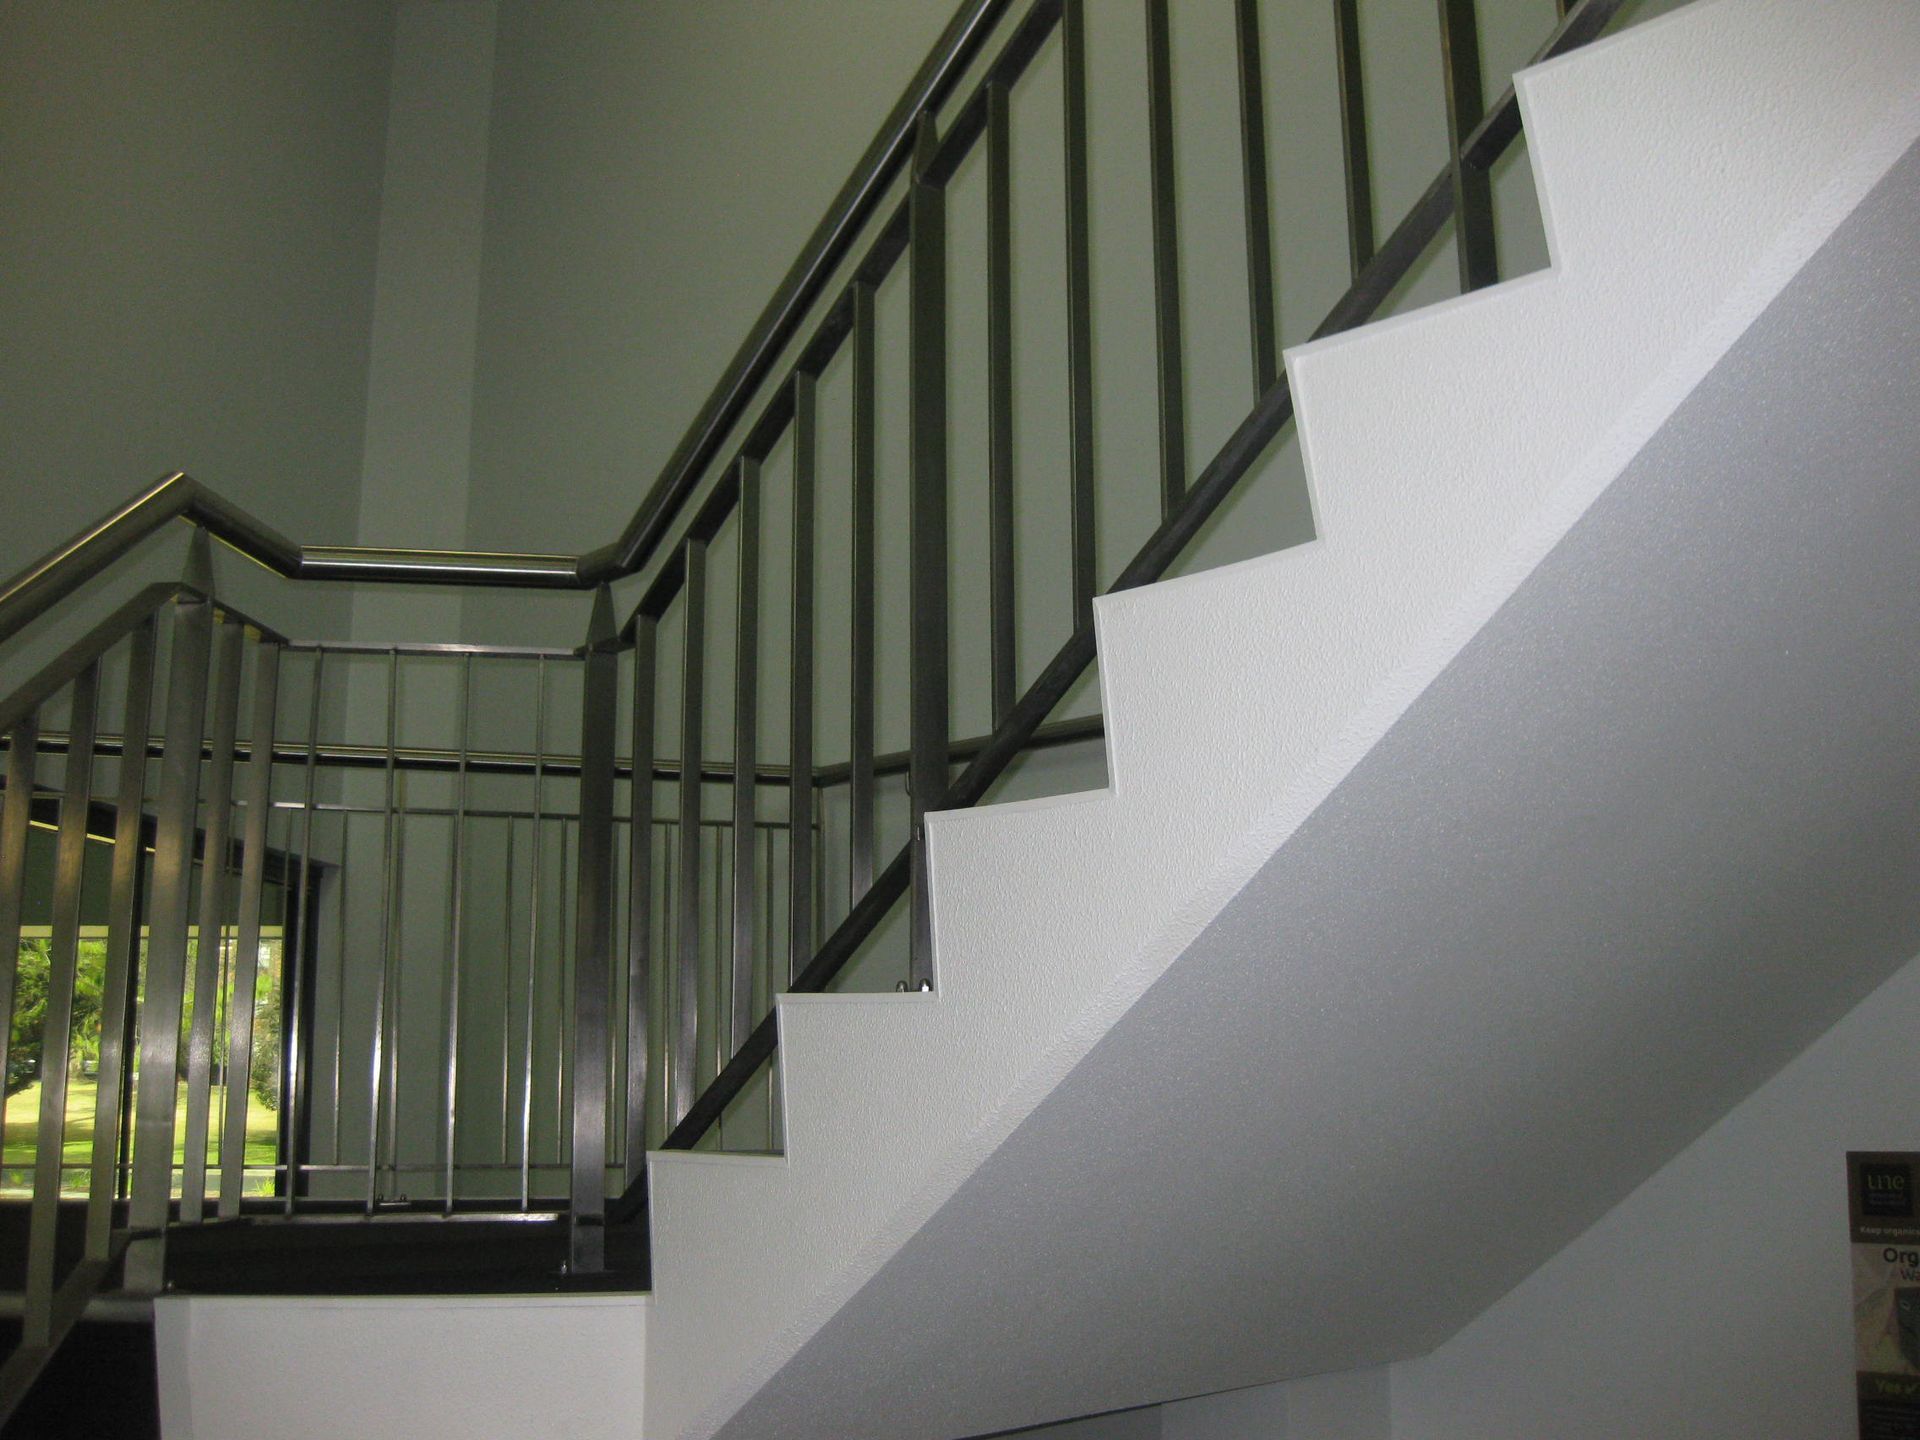 high quality paint job completed on staircase at wright college armidale 